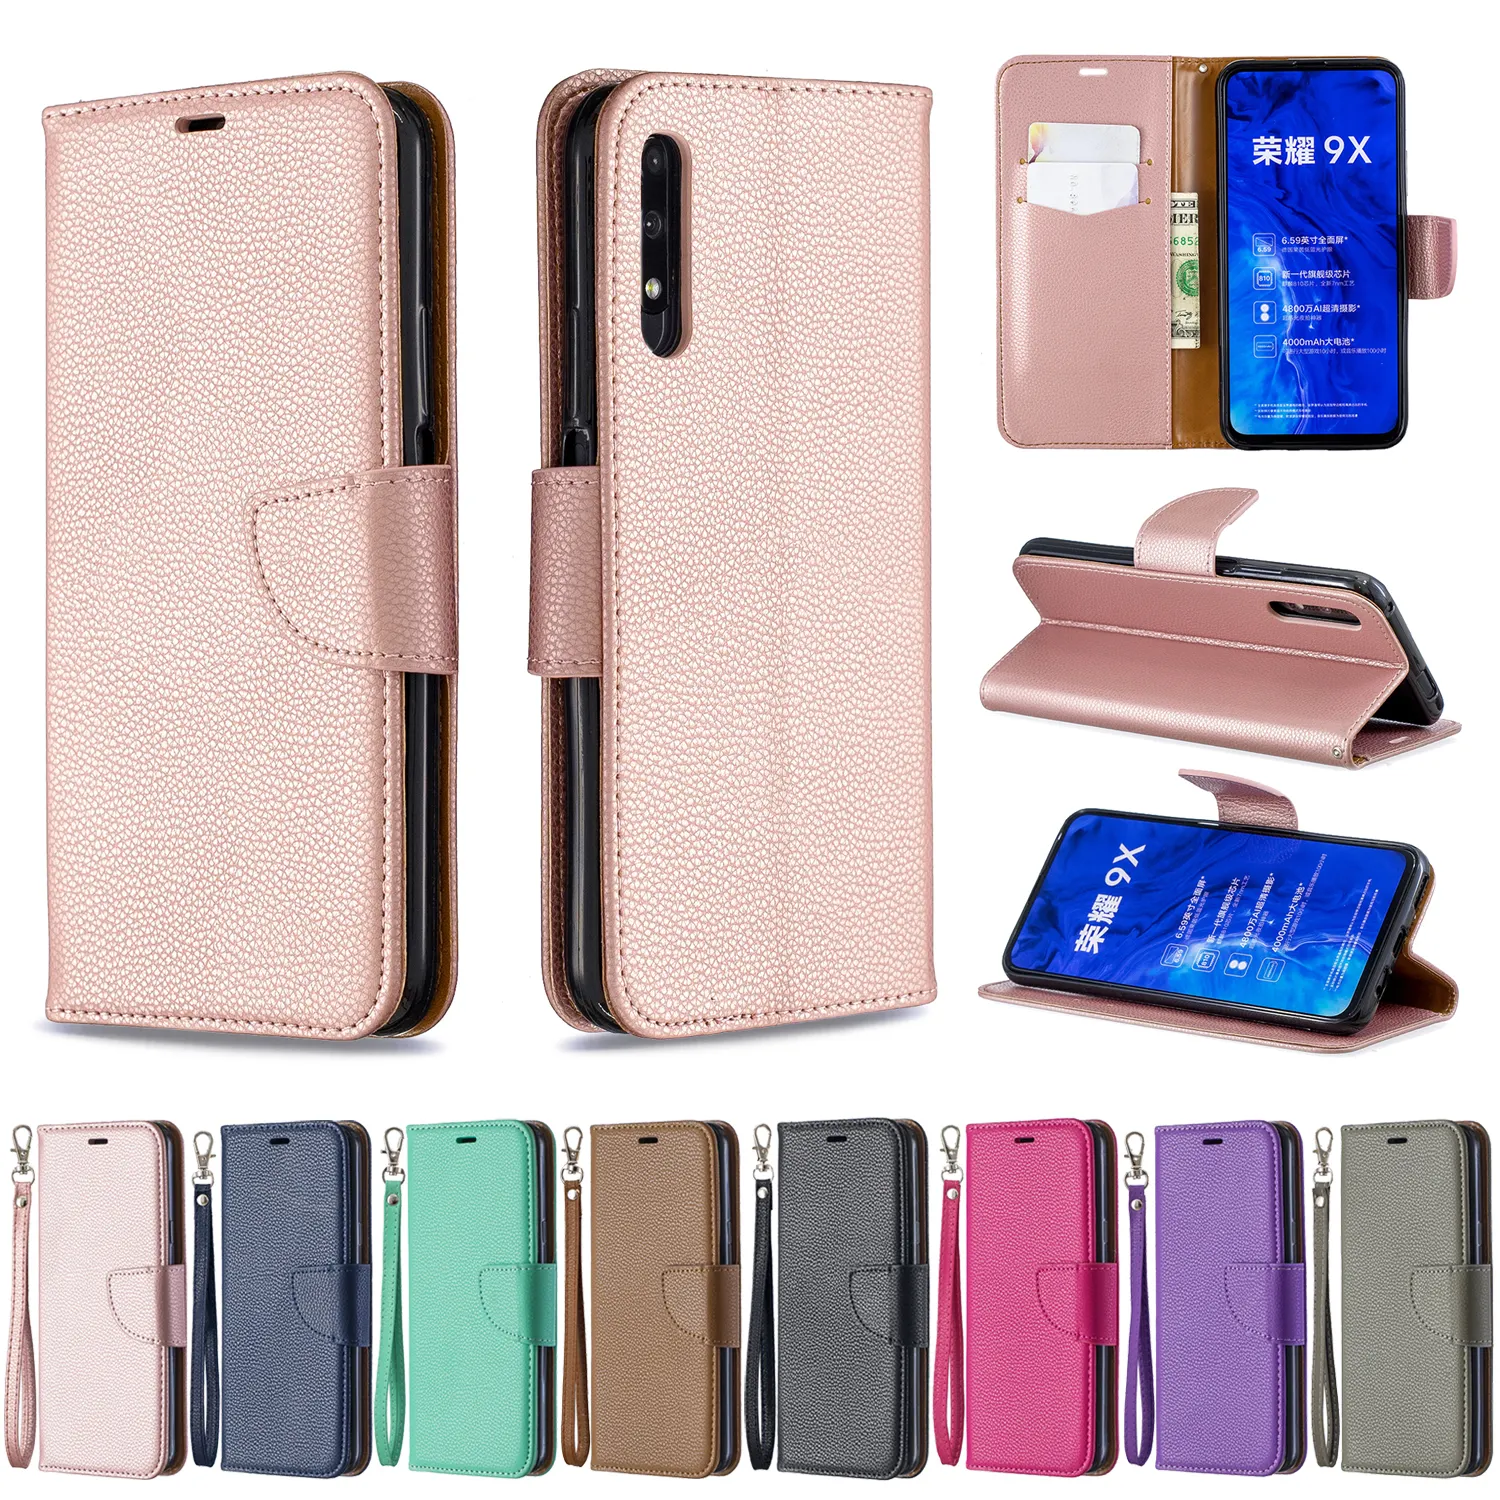 Phone Case for Huawei Honor 9X Pro Simple Lichi Skin PU Leather Flip Wallet Shockproof Cases For Huawei Honor 9X Book Cover